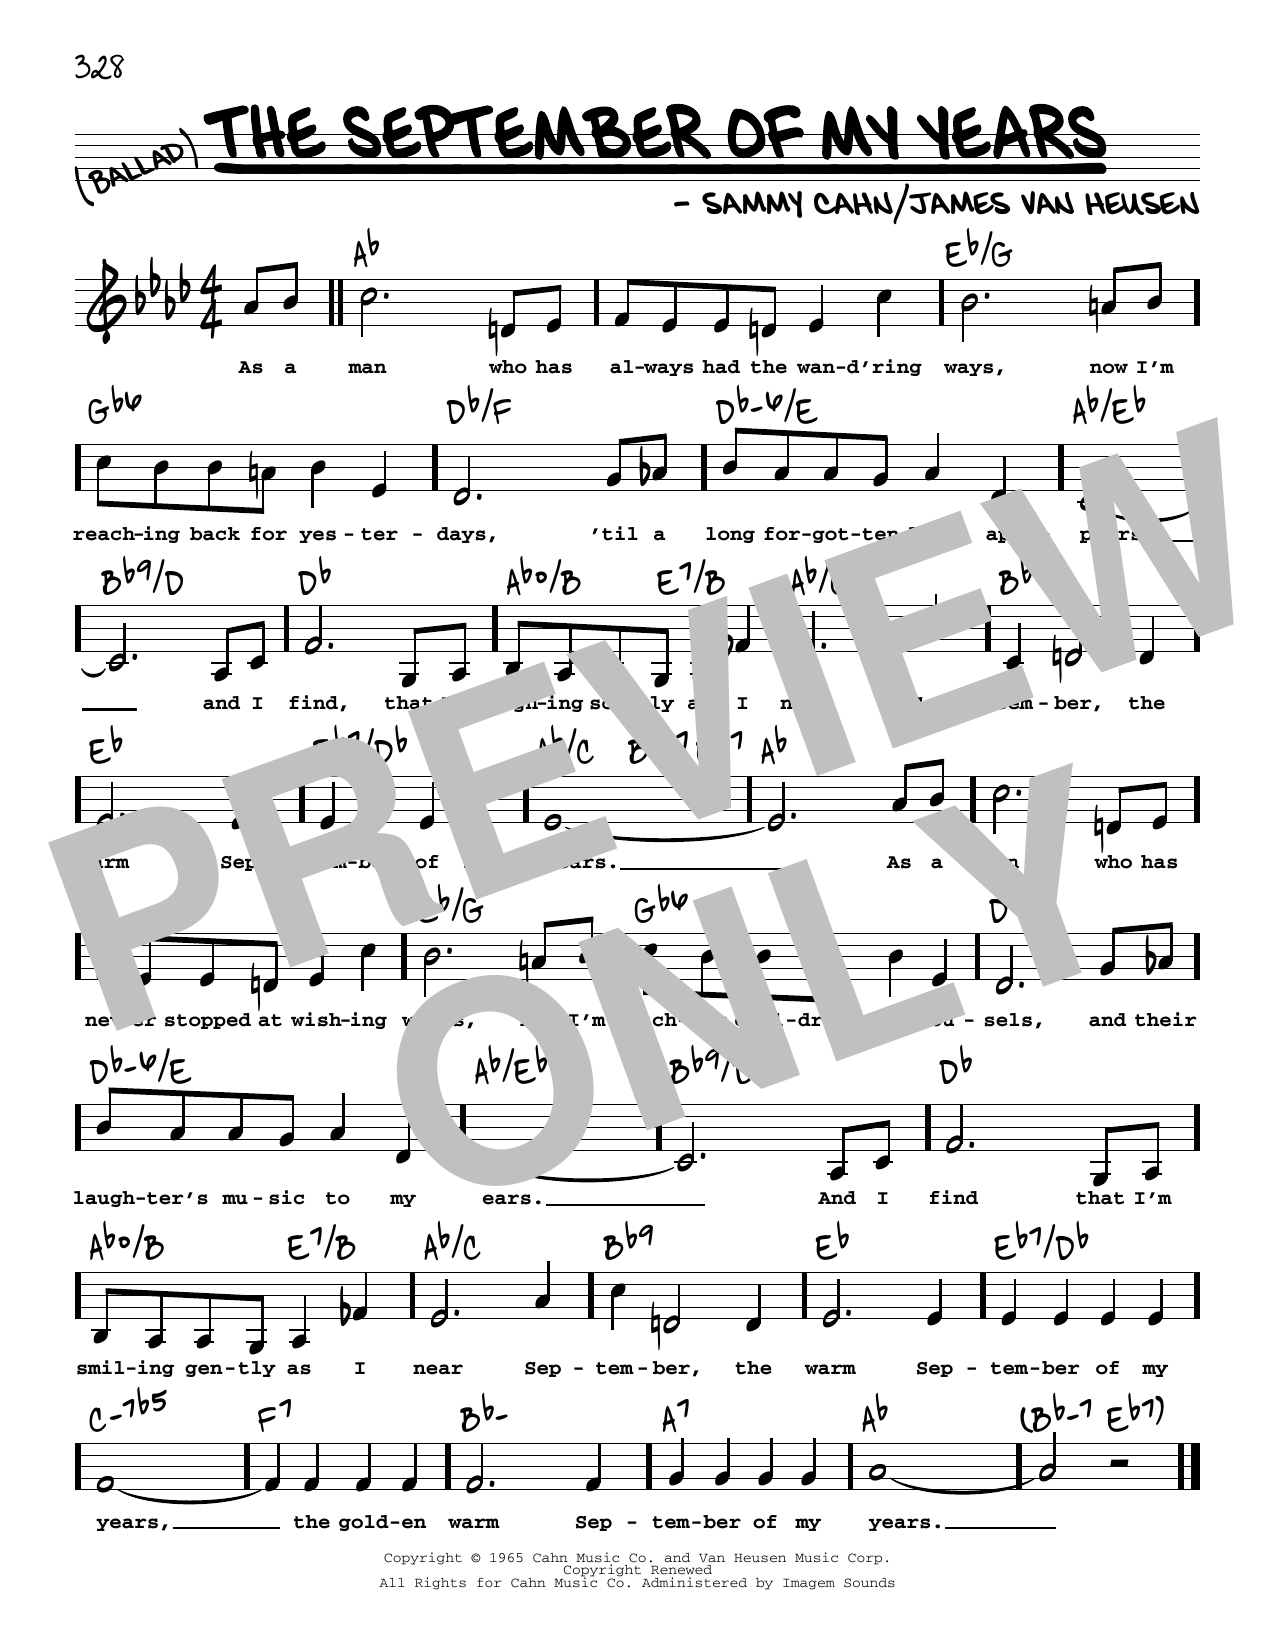 Download Frank Sinatra The September Of My Years (Low Voice) Sheet Music